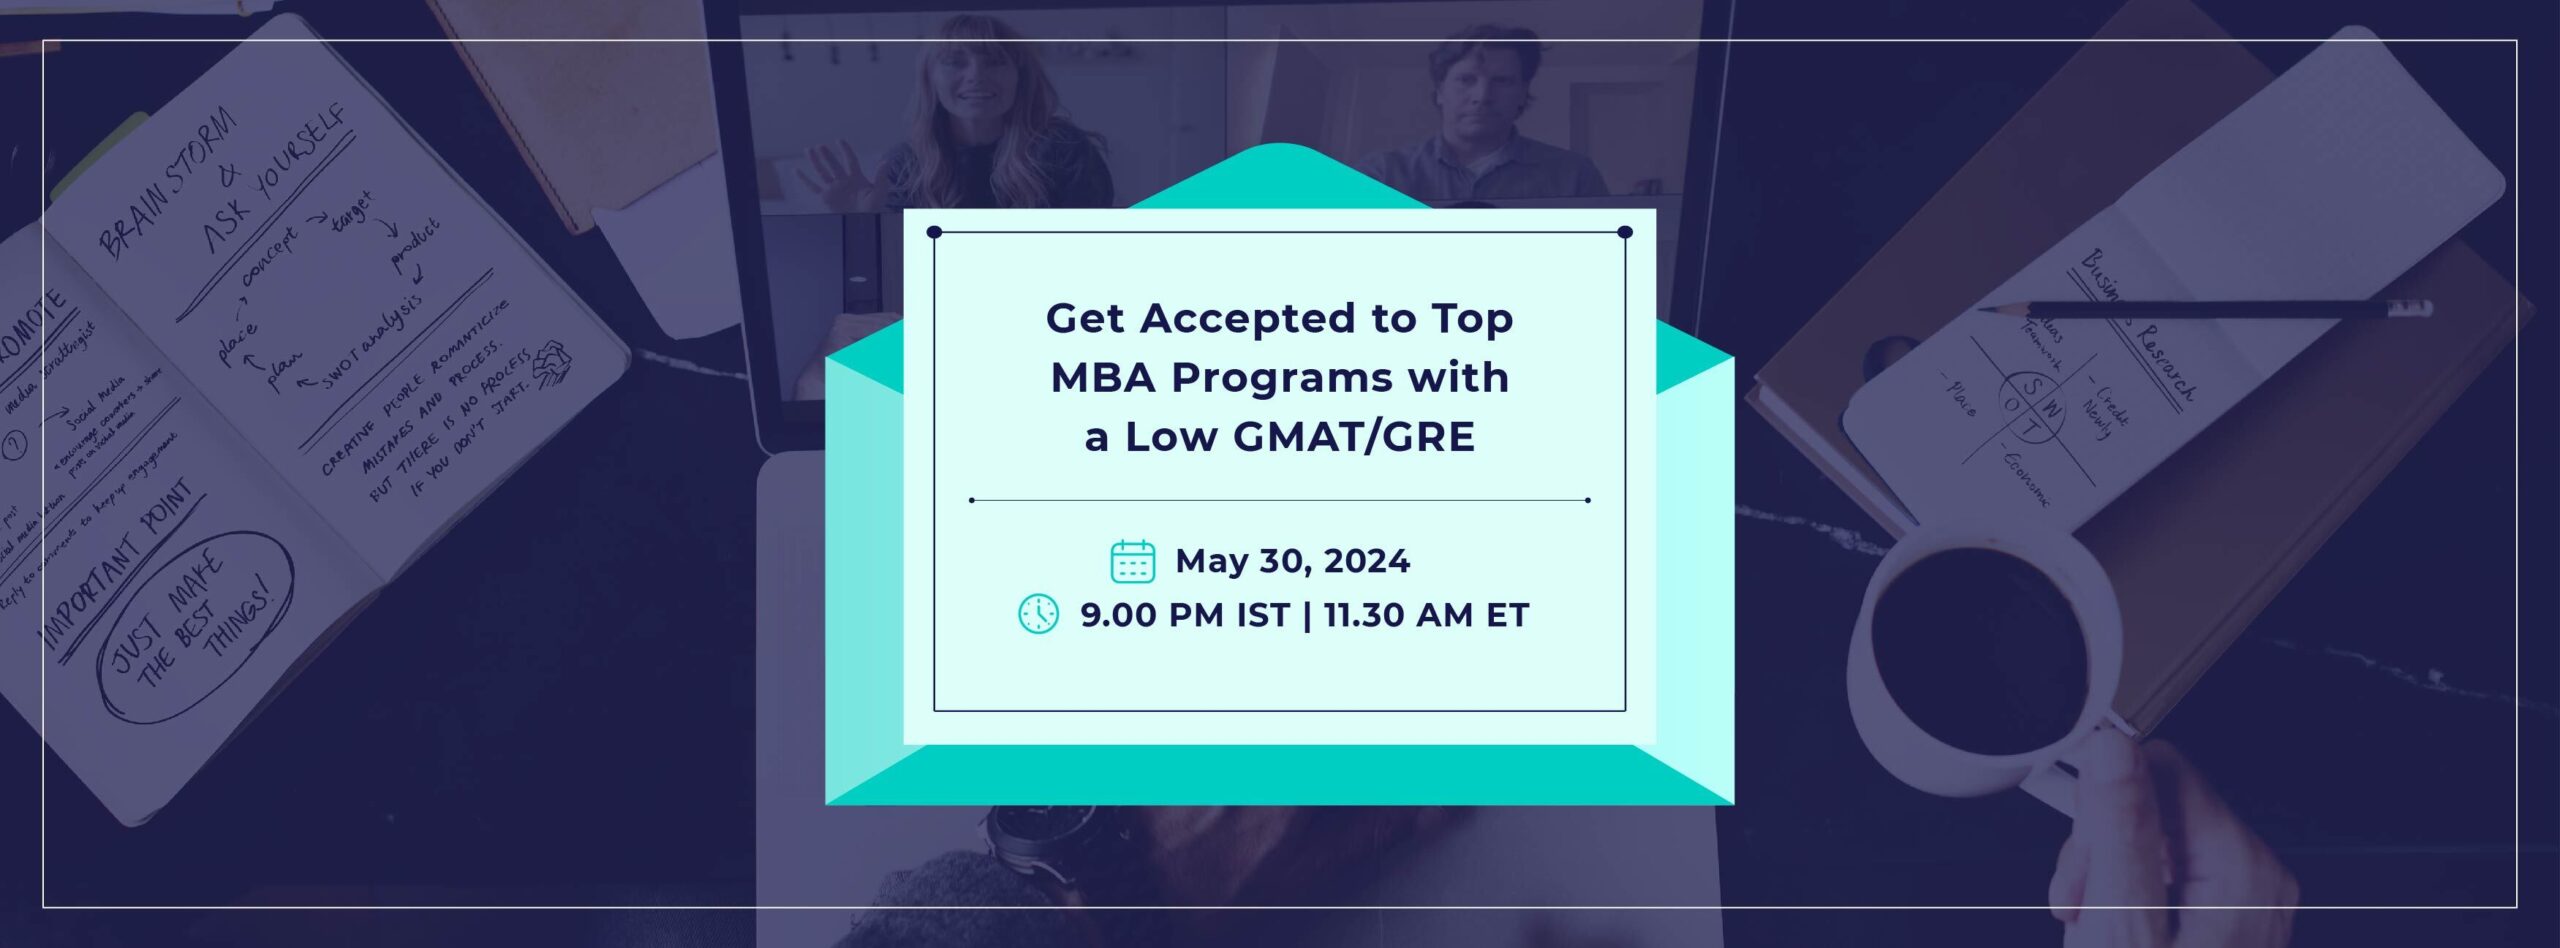 Get Accepted to Top MBA Programs with a Low GMAT/GRE